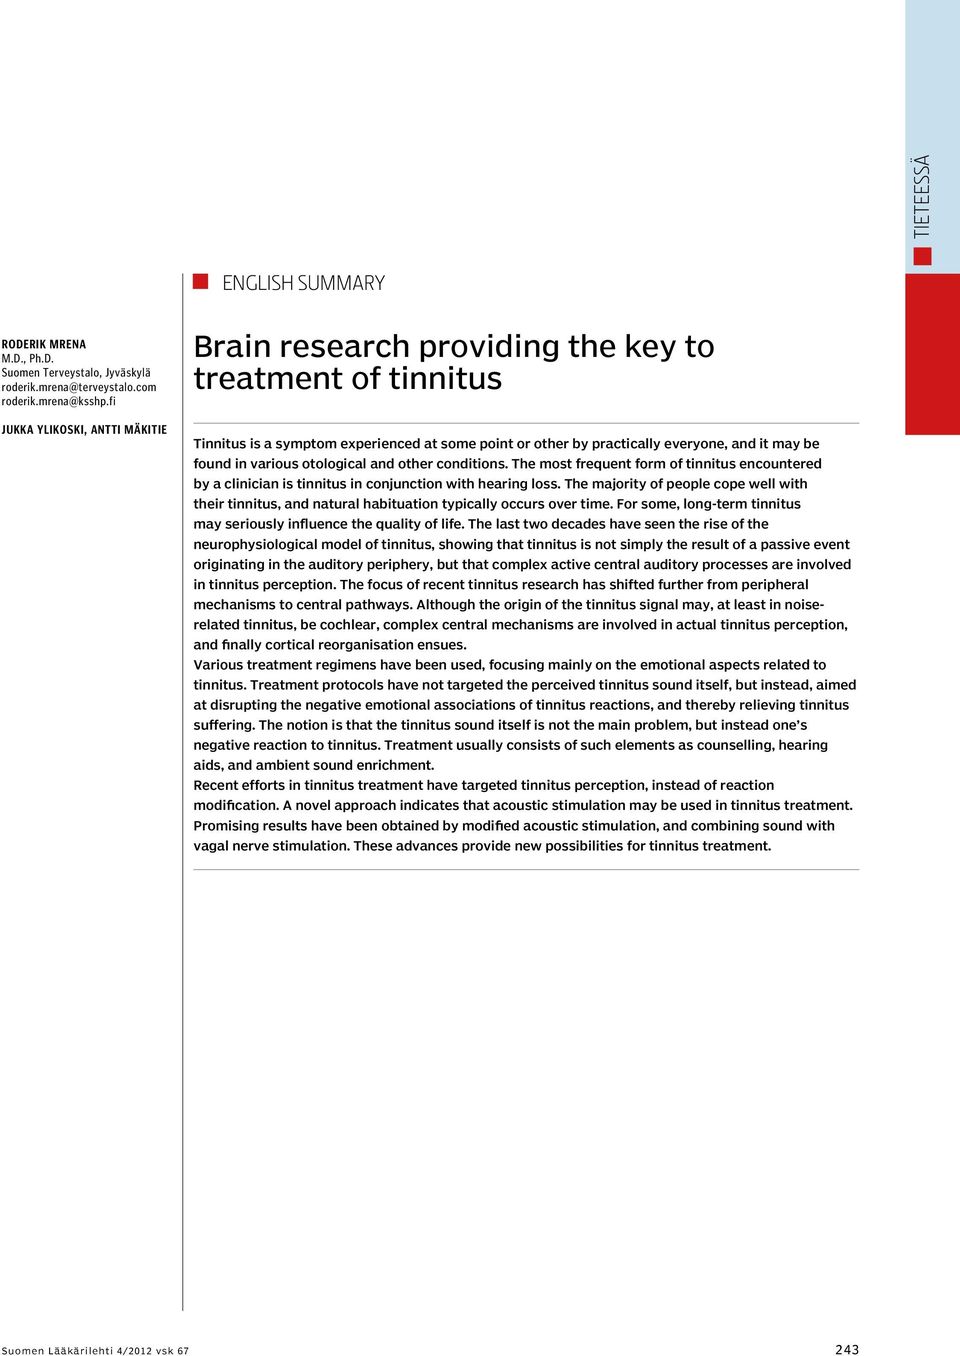 various otological and other conditions. The most frequent form of tinnitus encountered by a clinician is tinnitus in conjunction with hearing loss.